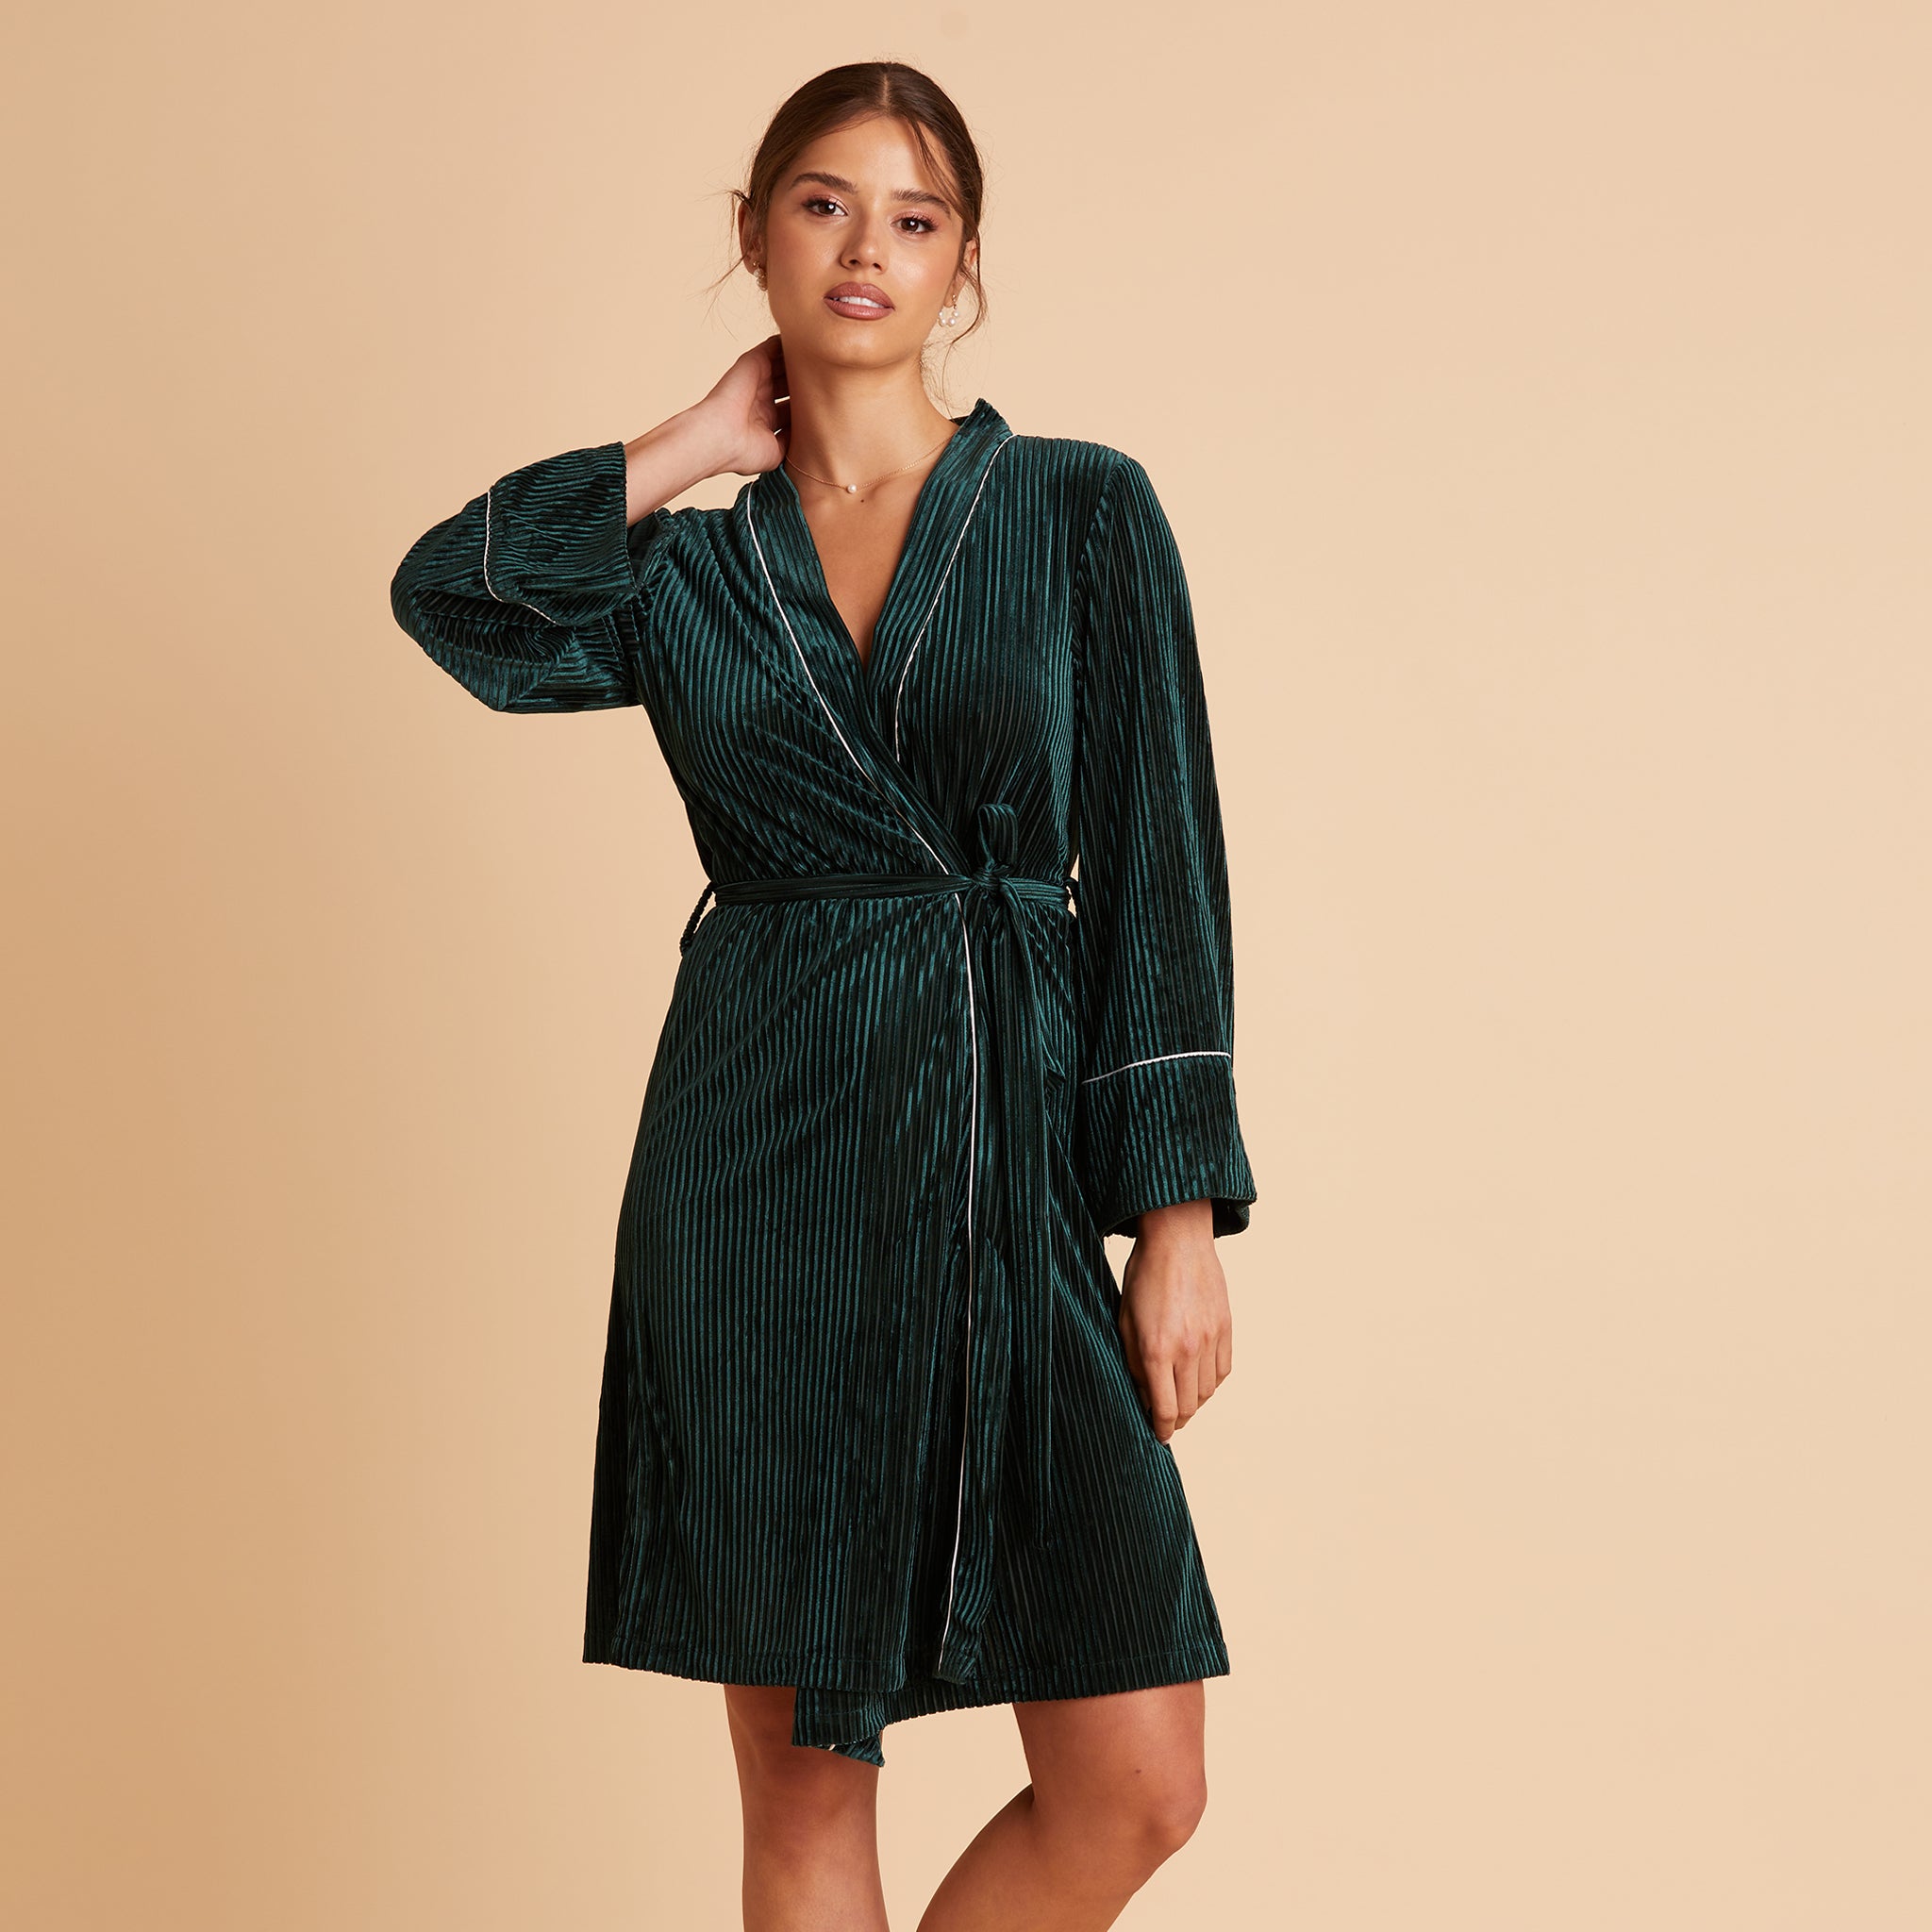 Velvet Ribbed Robe in Green by Birdy Grey, front view